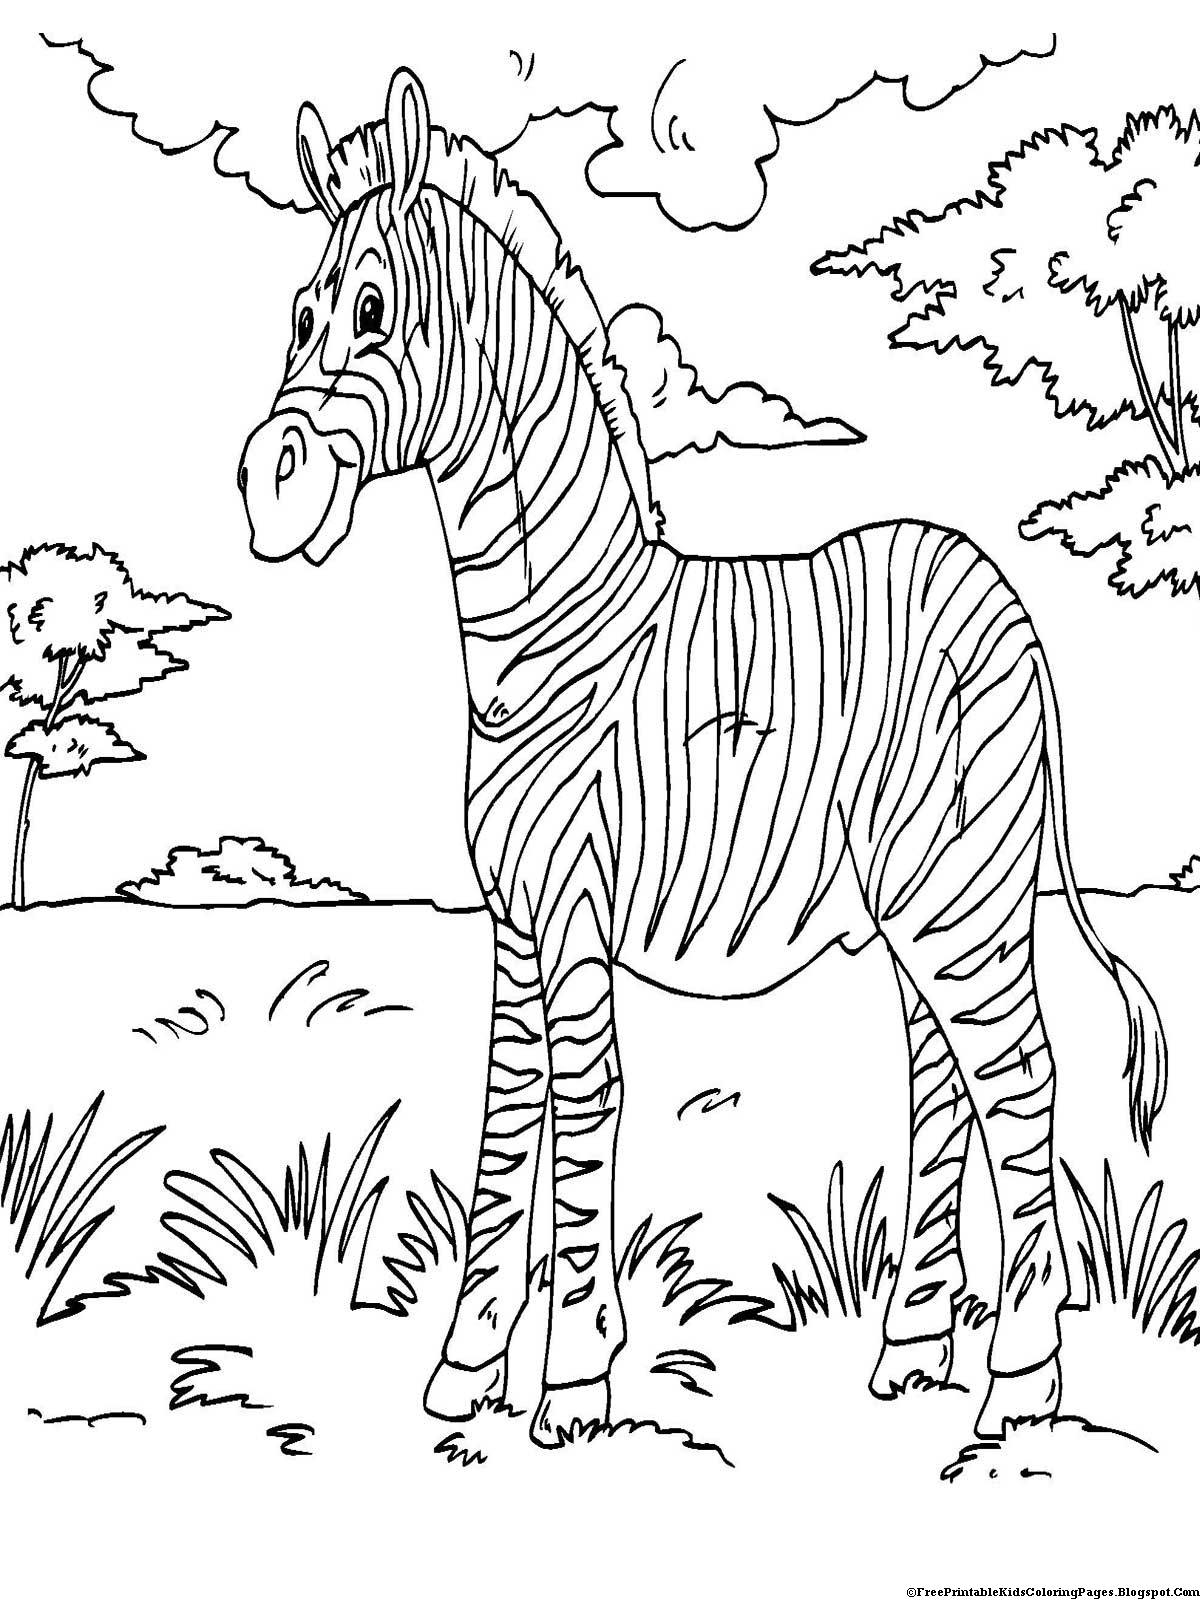 Coloring Pages To Print 3